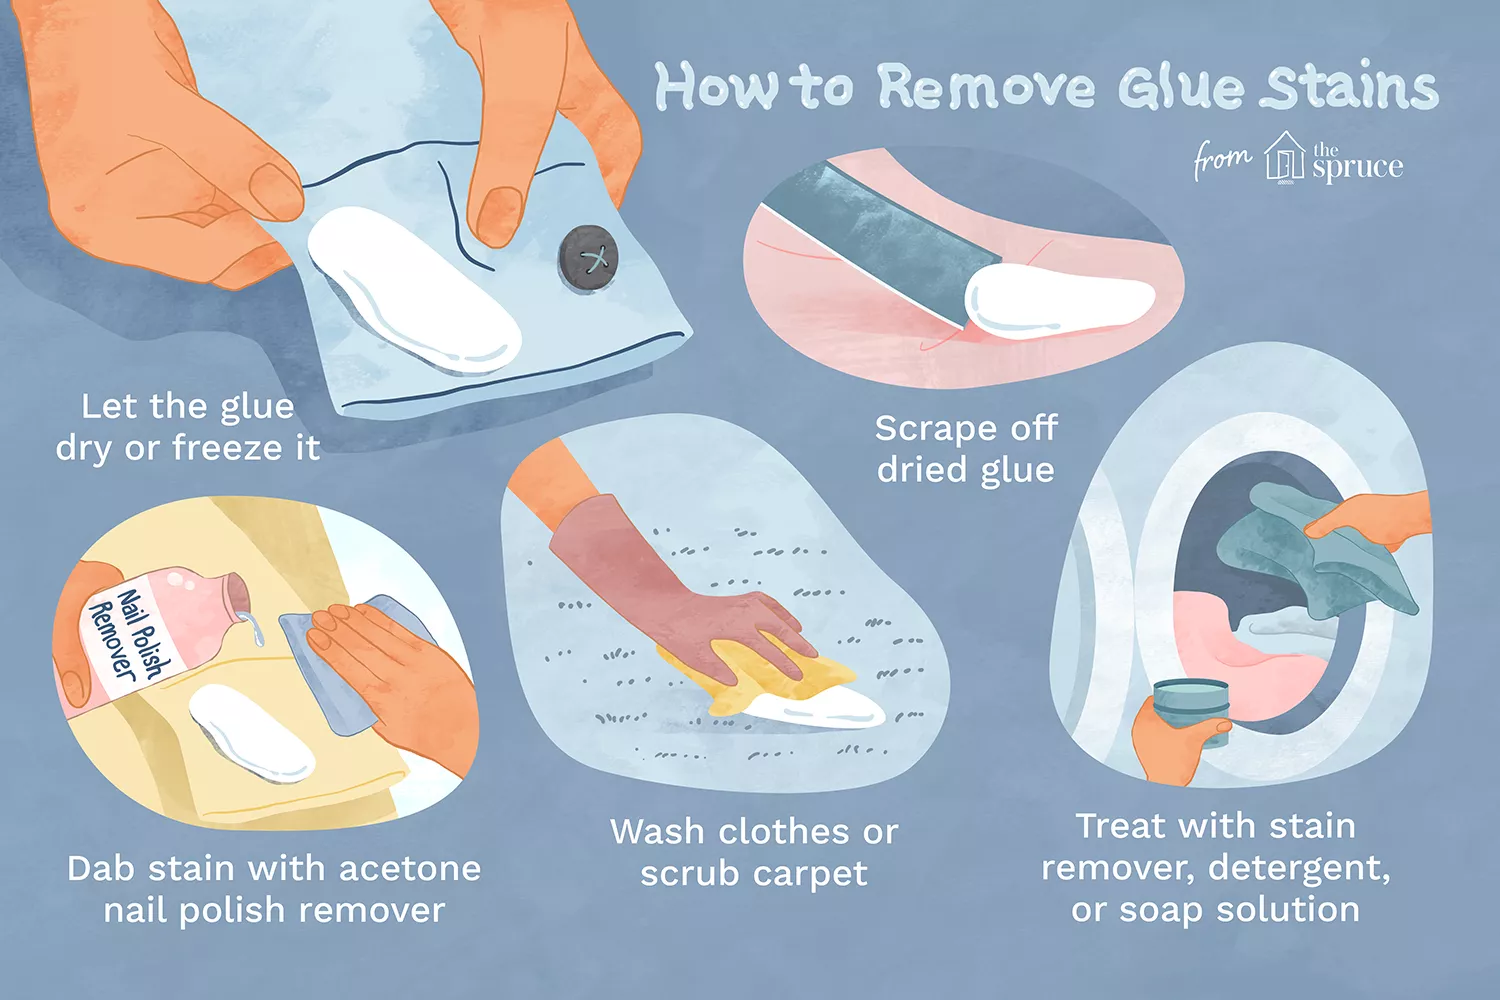 Using Dish Soap to Remove Glue Stains